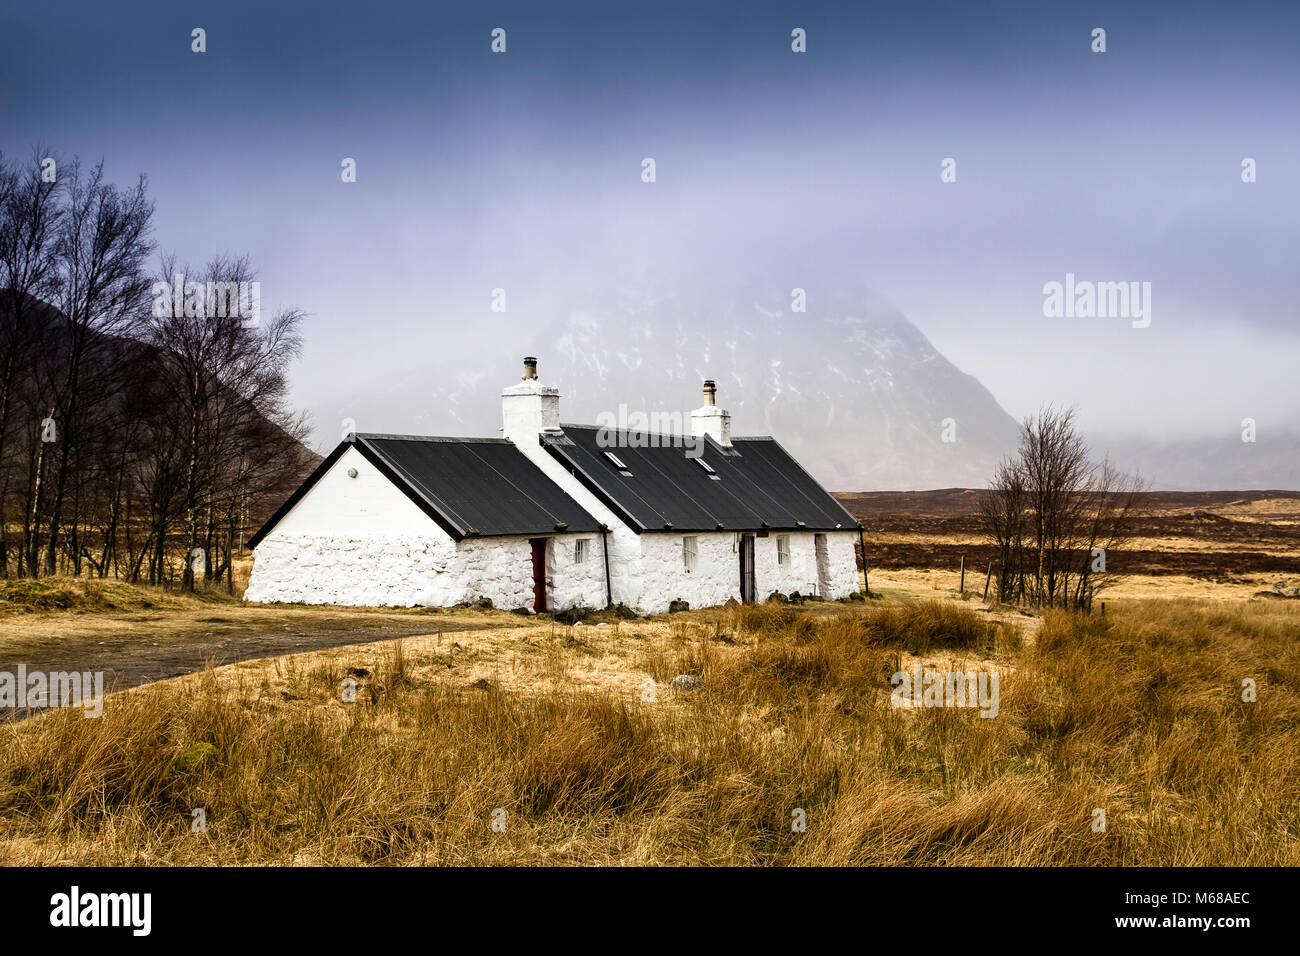 Blackrock Cottage, Glencoe with Buchaille Etive Mor in the background. Stock Photo